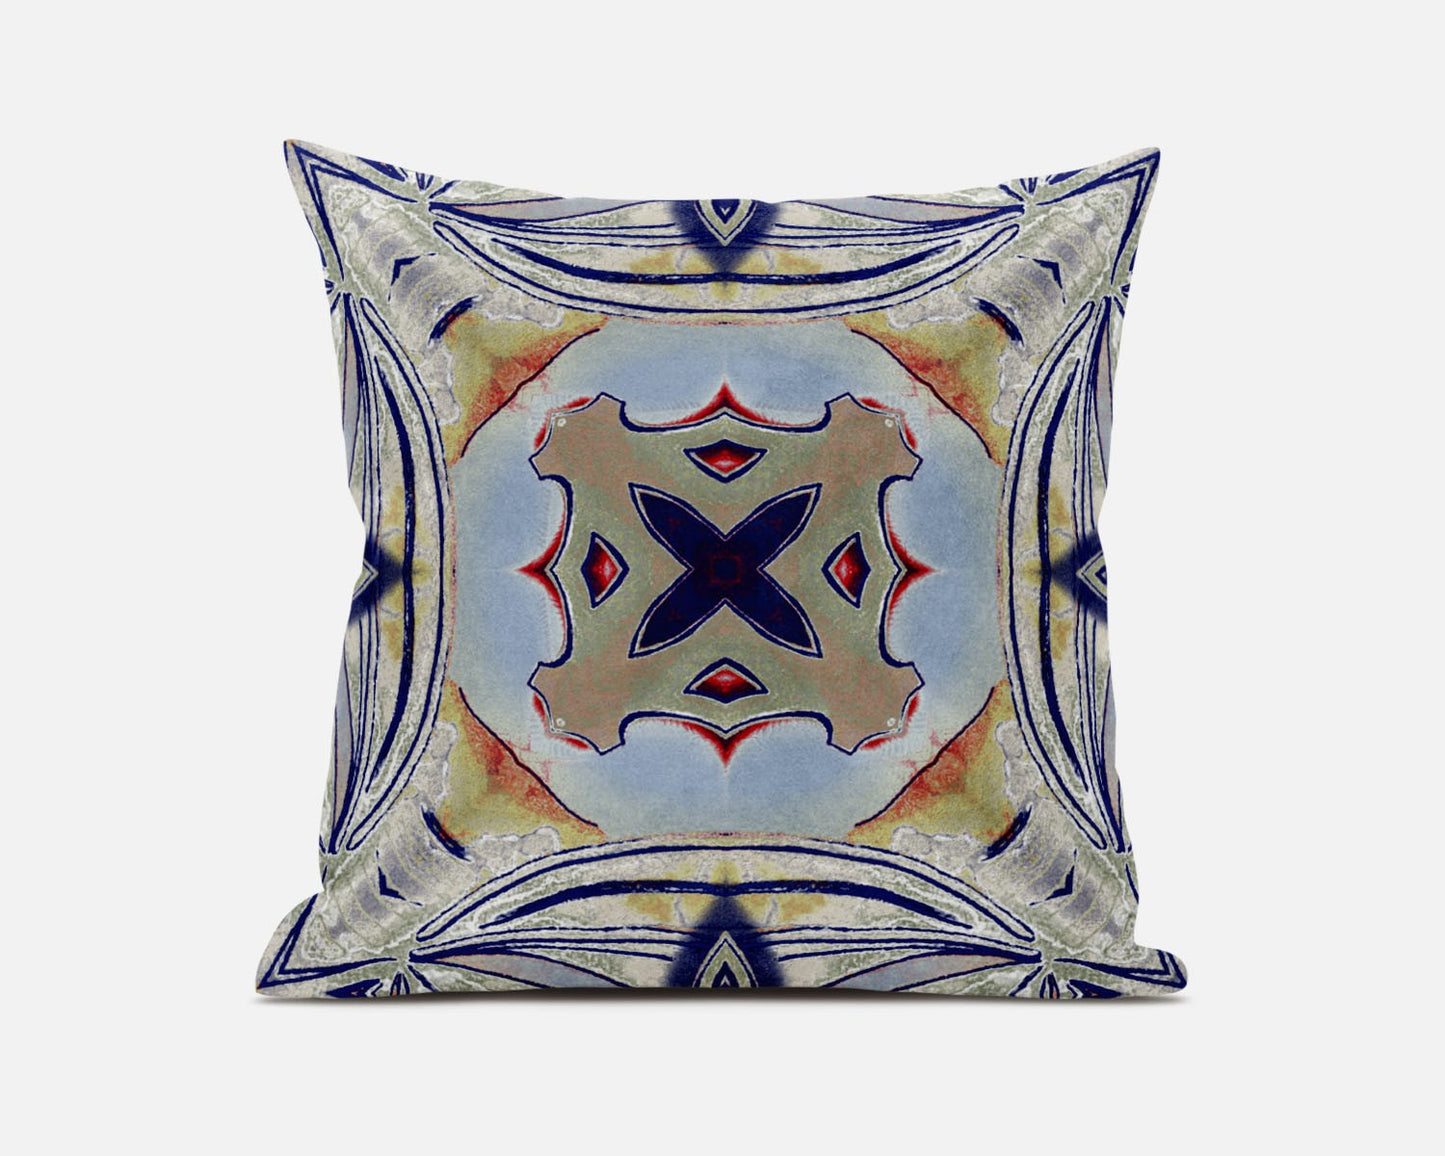 18” Navy Sage Geo Tribal Suede Throw Pillow